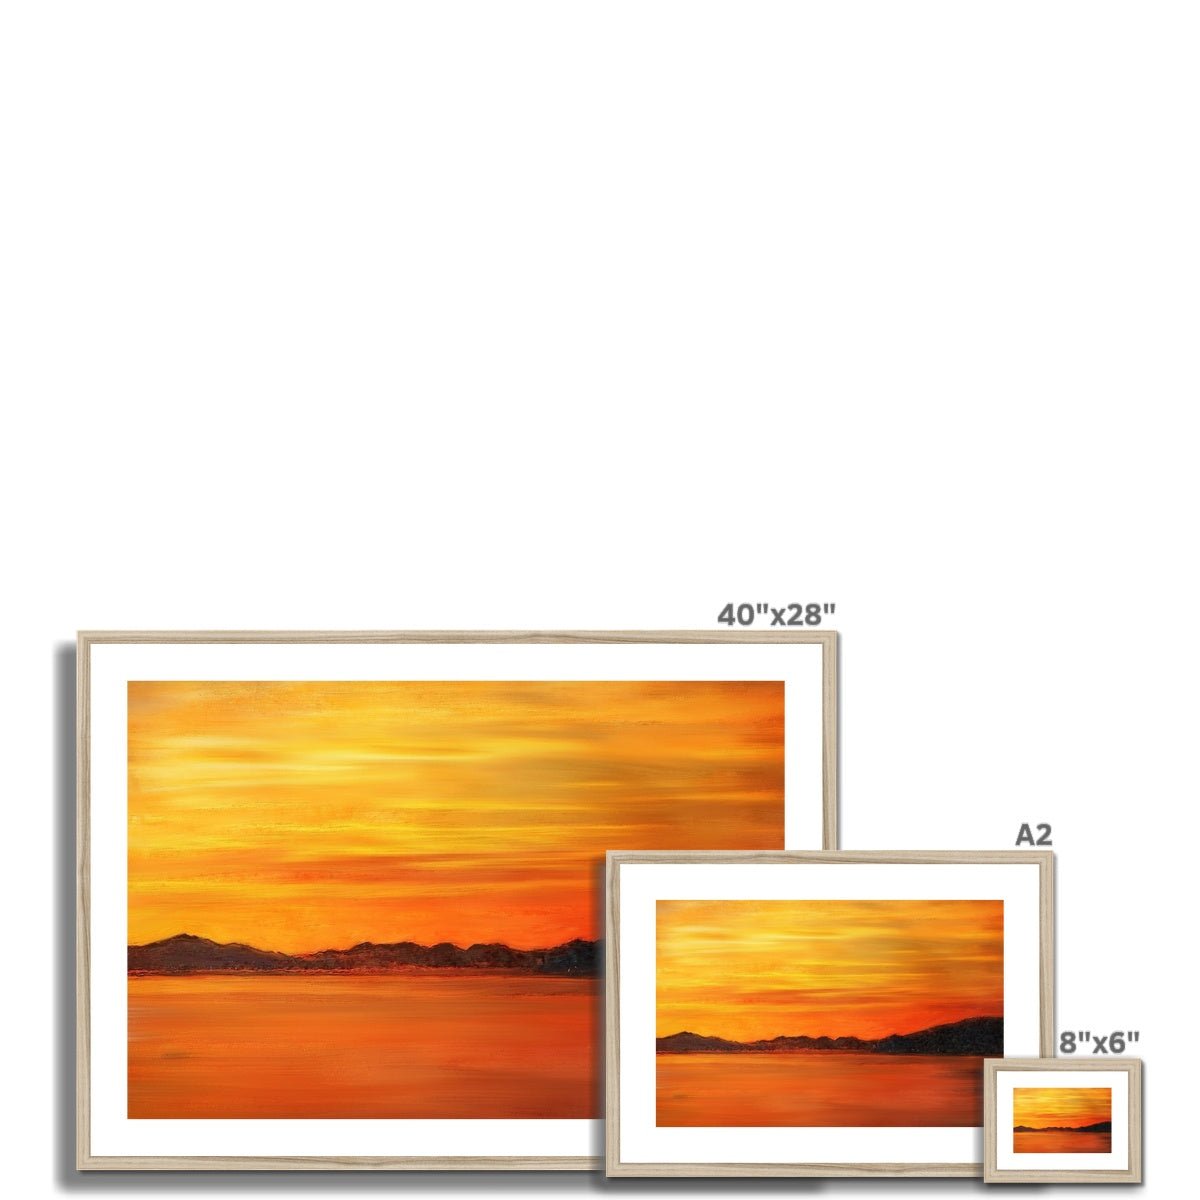 Loch Fyne Sunset Painting | Framed & Mounted Prints From Scotland-Framed & Mounted Prints-Scottish Lochs & Mountains Art Gallery-Paintings, Prints, Homeware, Art Gifts From Scotland By Scottish Artist Kevin Hunter